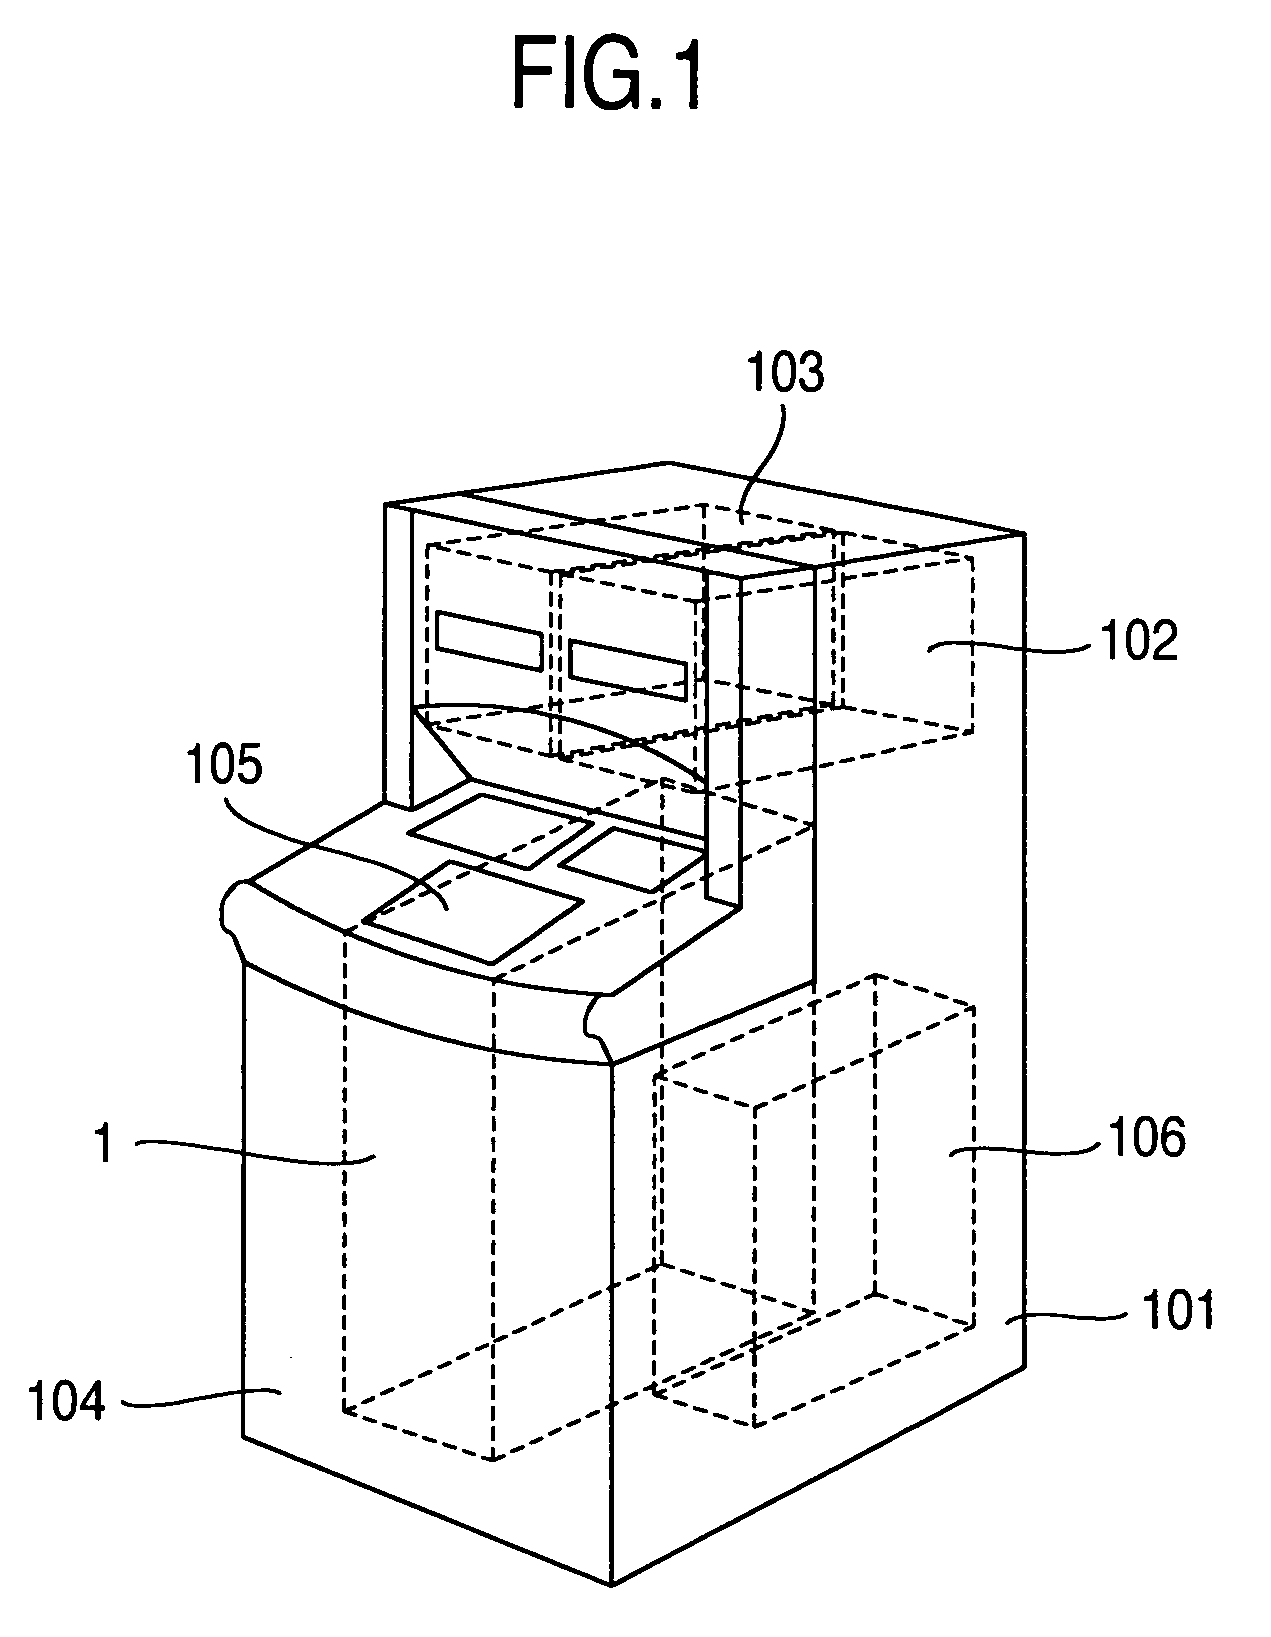 Bill receiving and paying apparatus